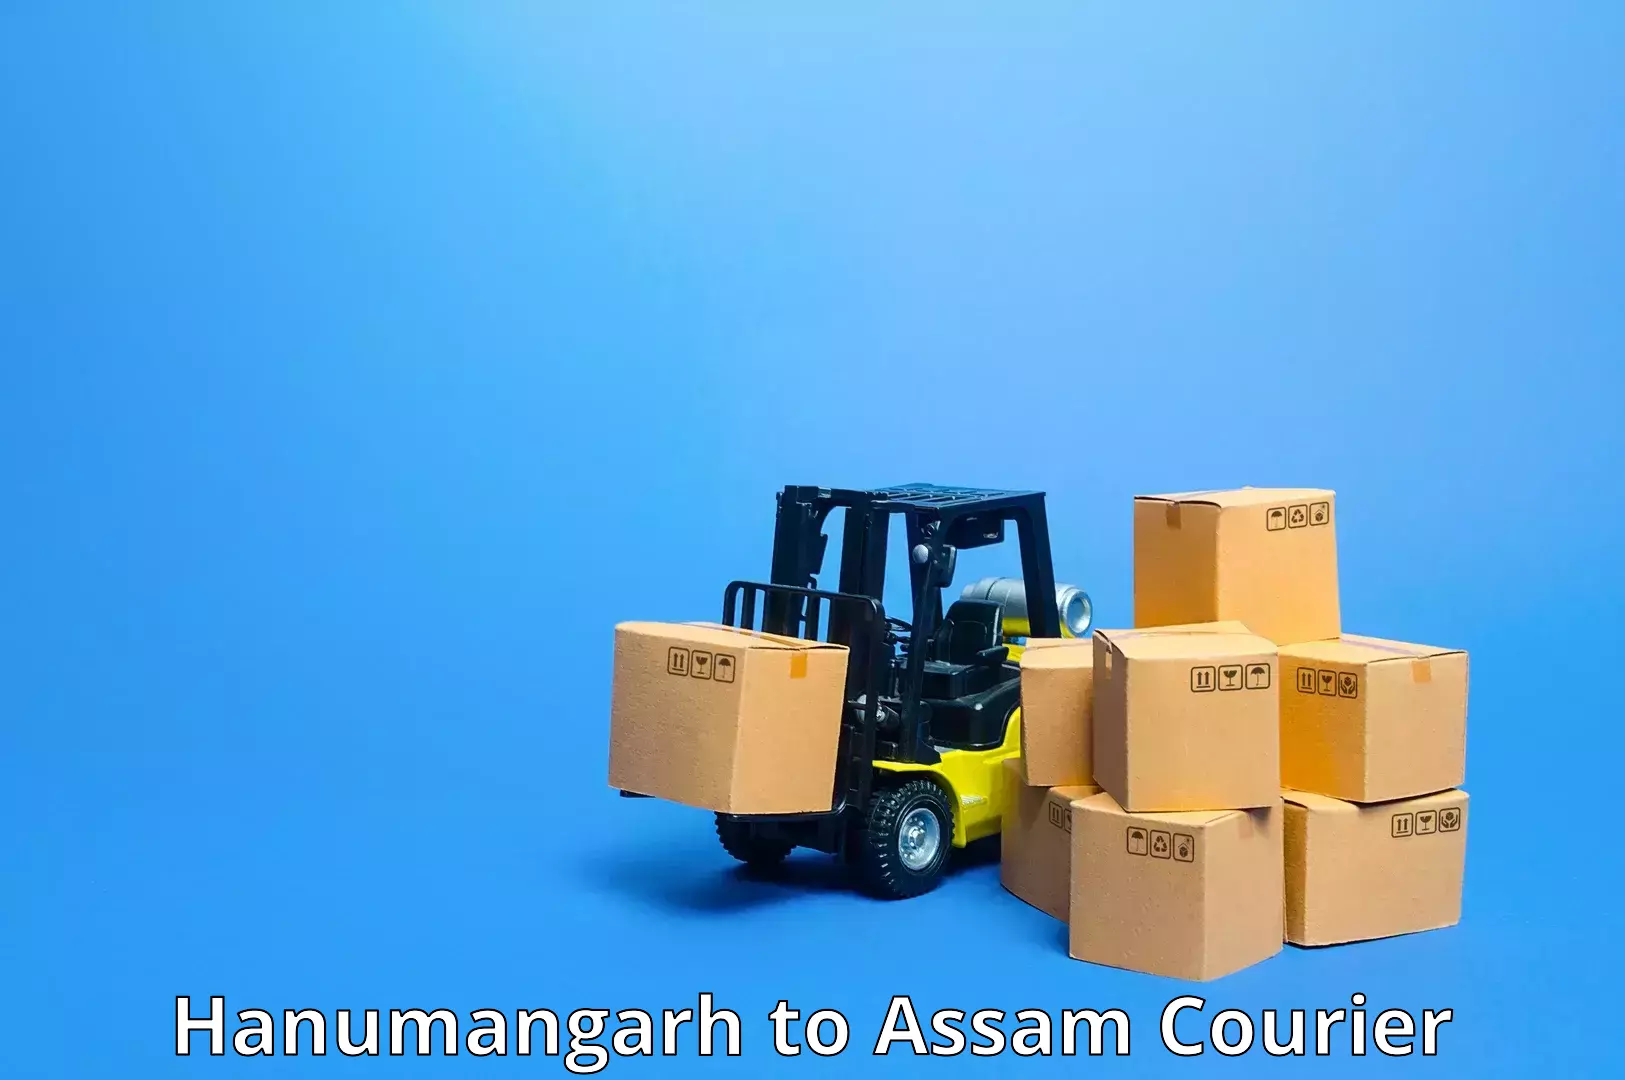 Sustainable shipping practices Hanumangarh to Digboi